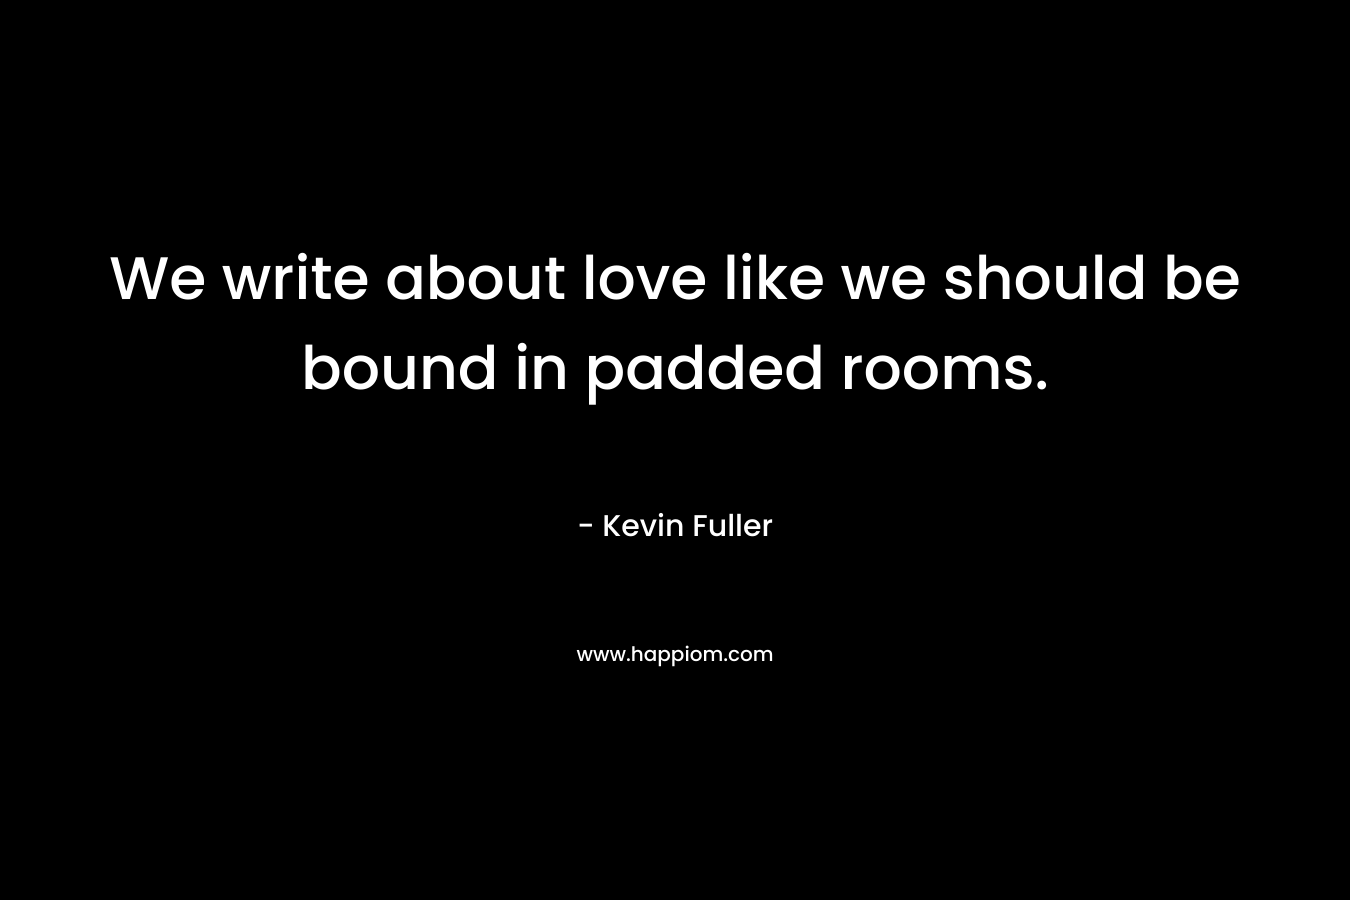 We write about love like we should be bound in padded rooms.